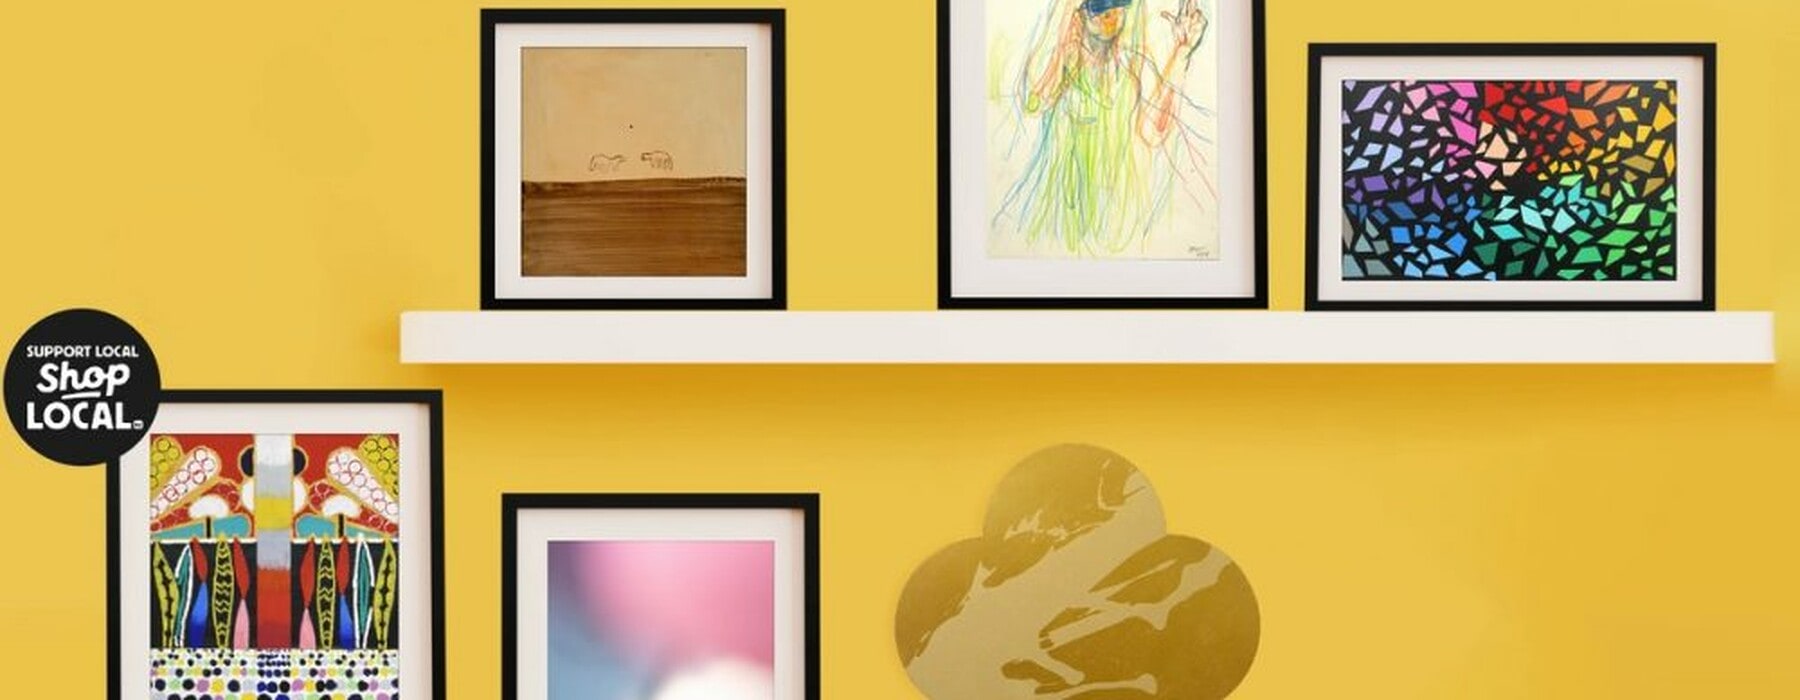 Collection of art from New Zealand local artists on a yellow background